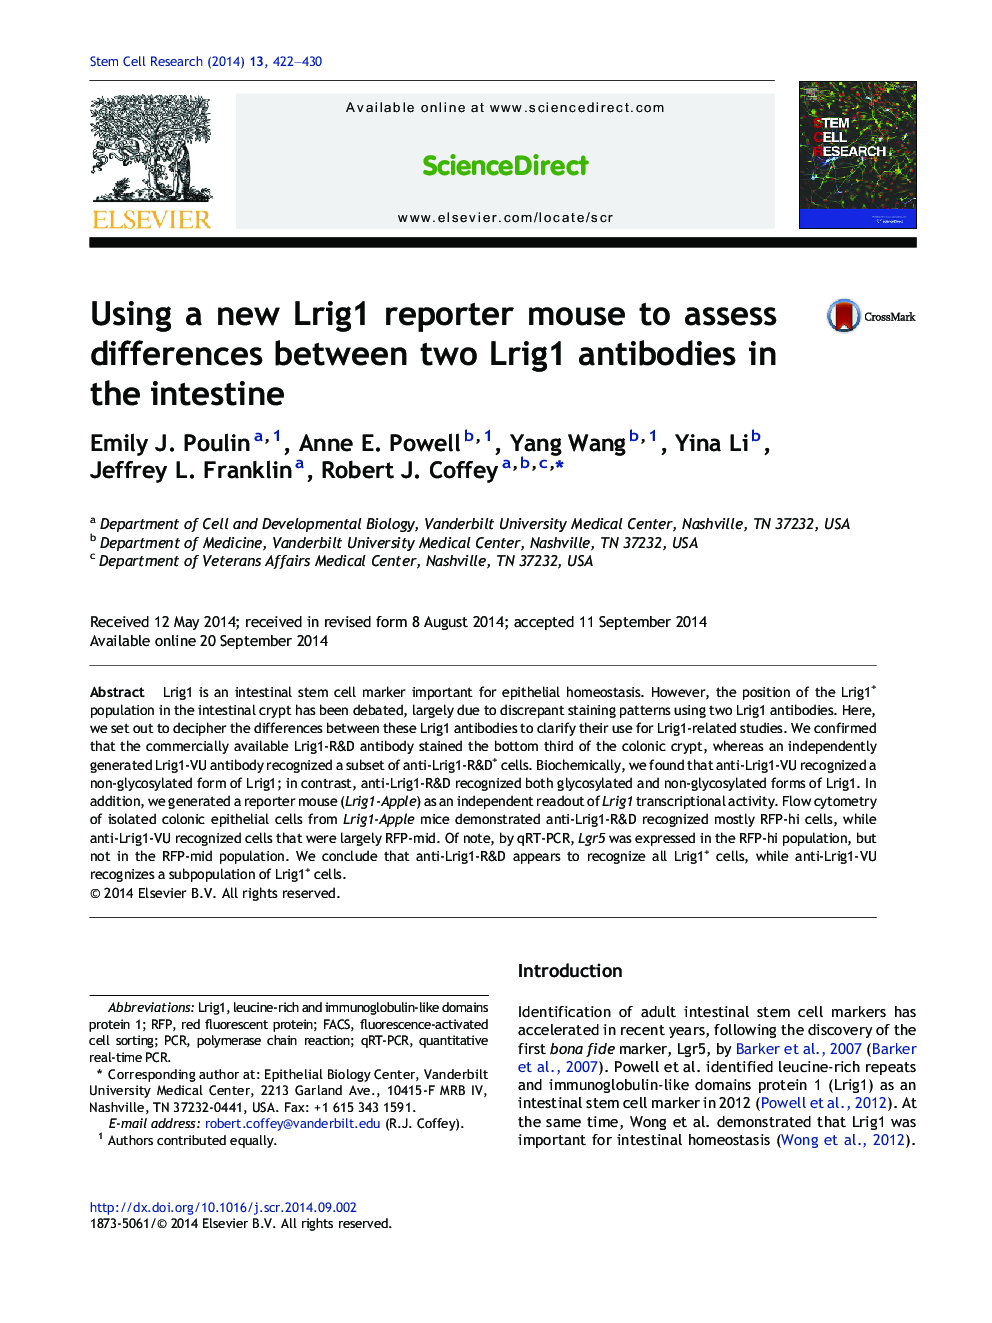 Using a new Lrig1 reporter mouse to assess differences between two Lrig1 antibodies in the intestine